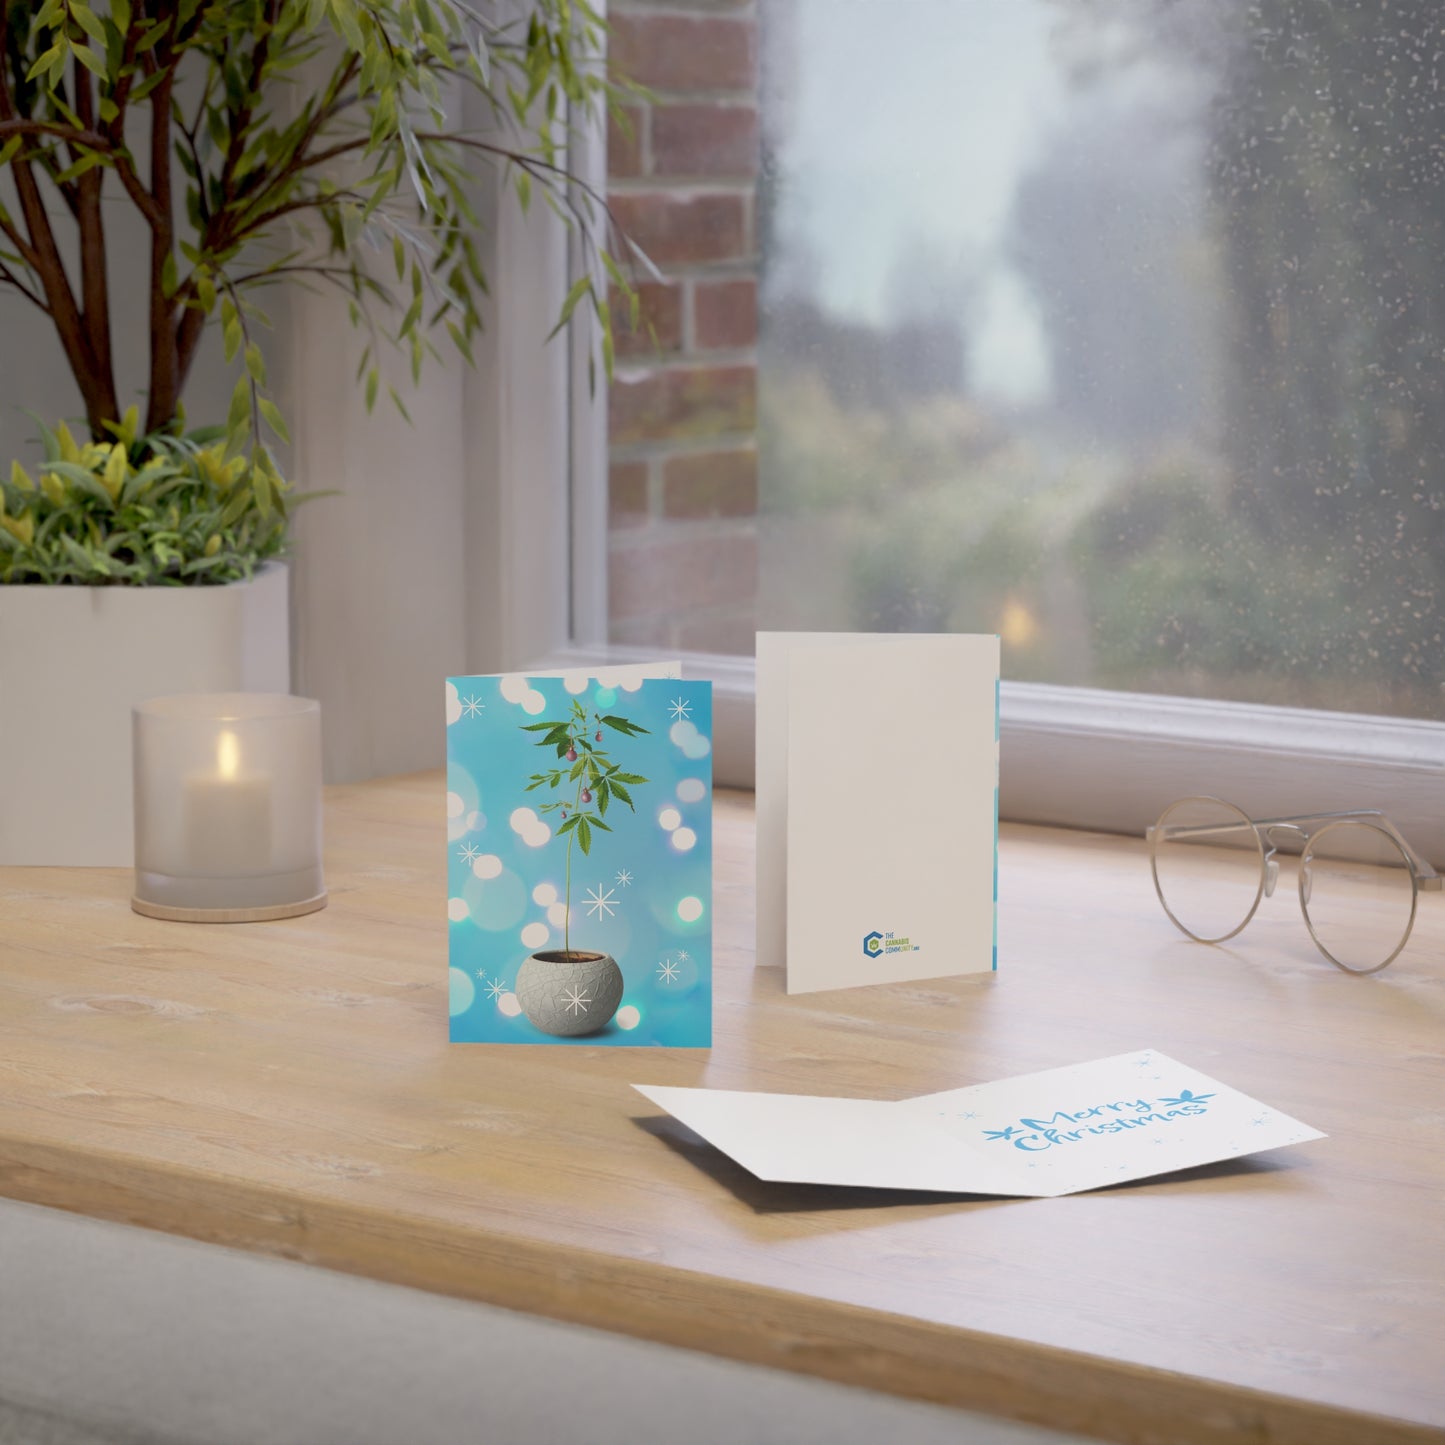 A serene workspace with a Potted Christmas Marijuana Plant Merry Christmas Greeting Card, blank envelope, glasses, and a lit candle on a wooden table by a window with a view of a rainy day.